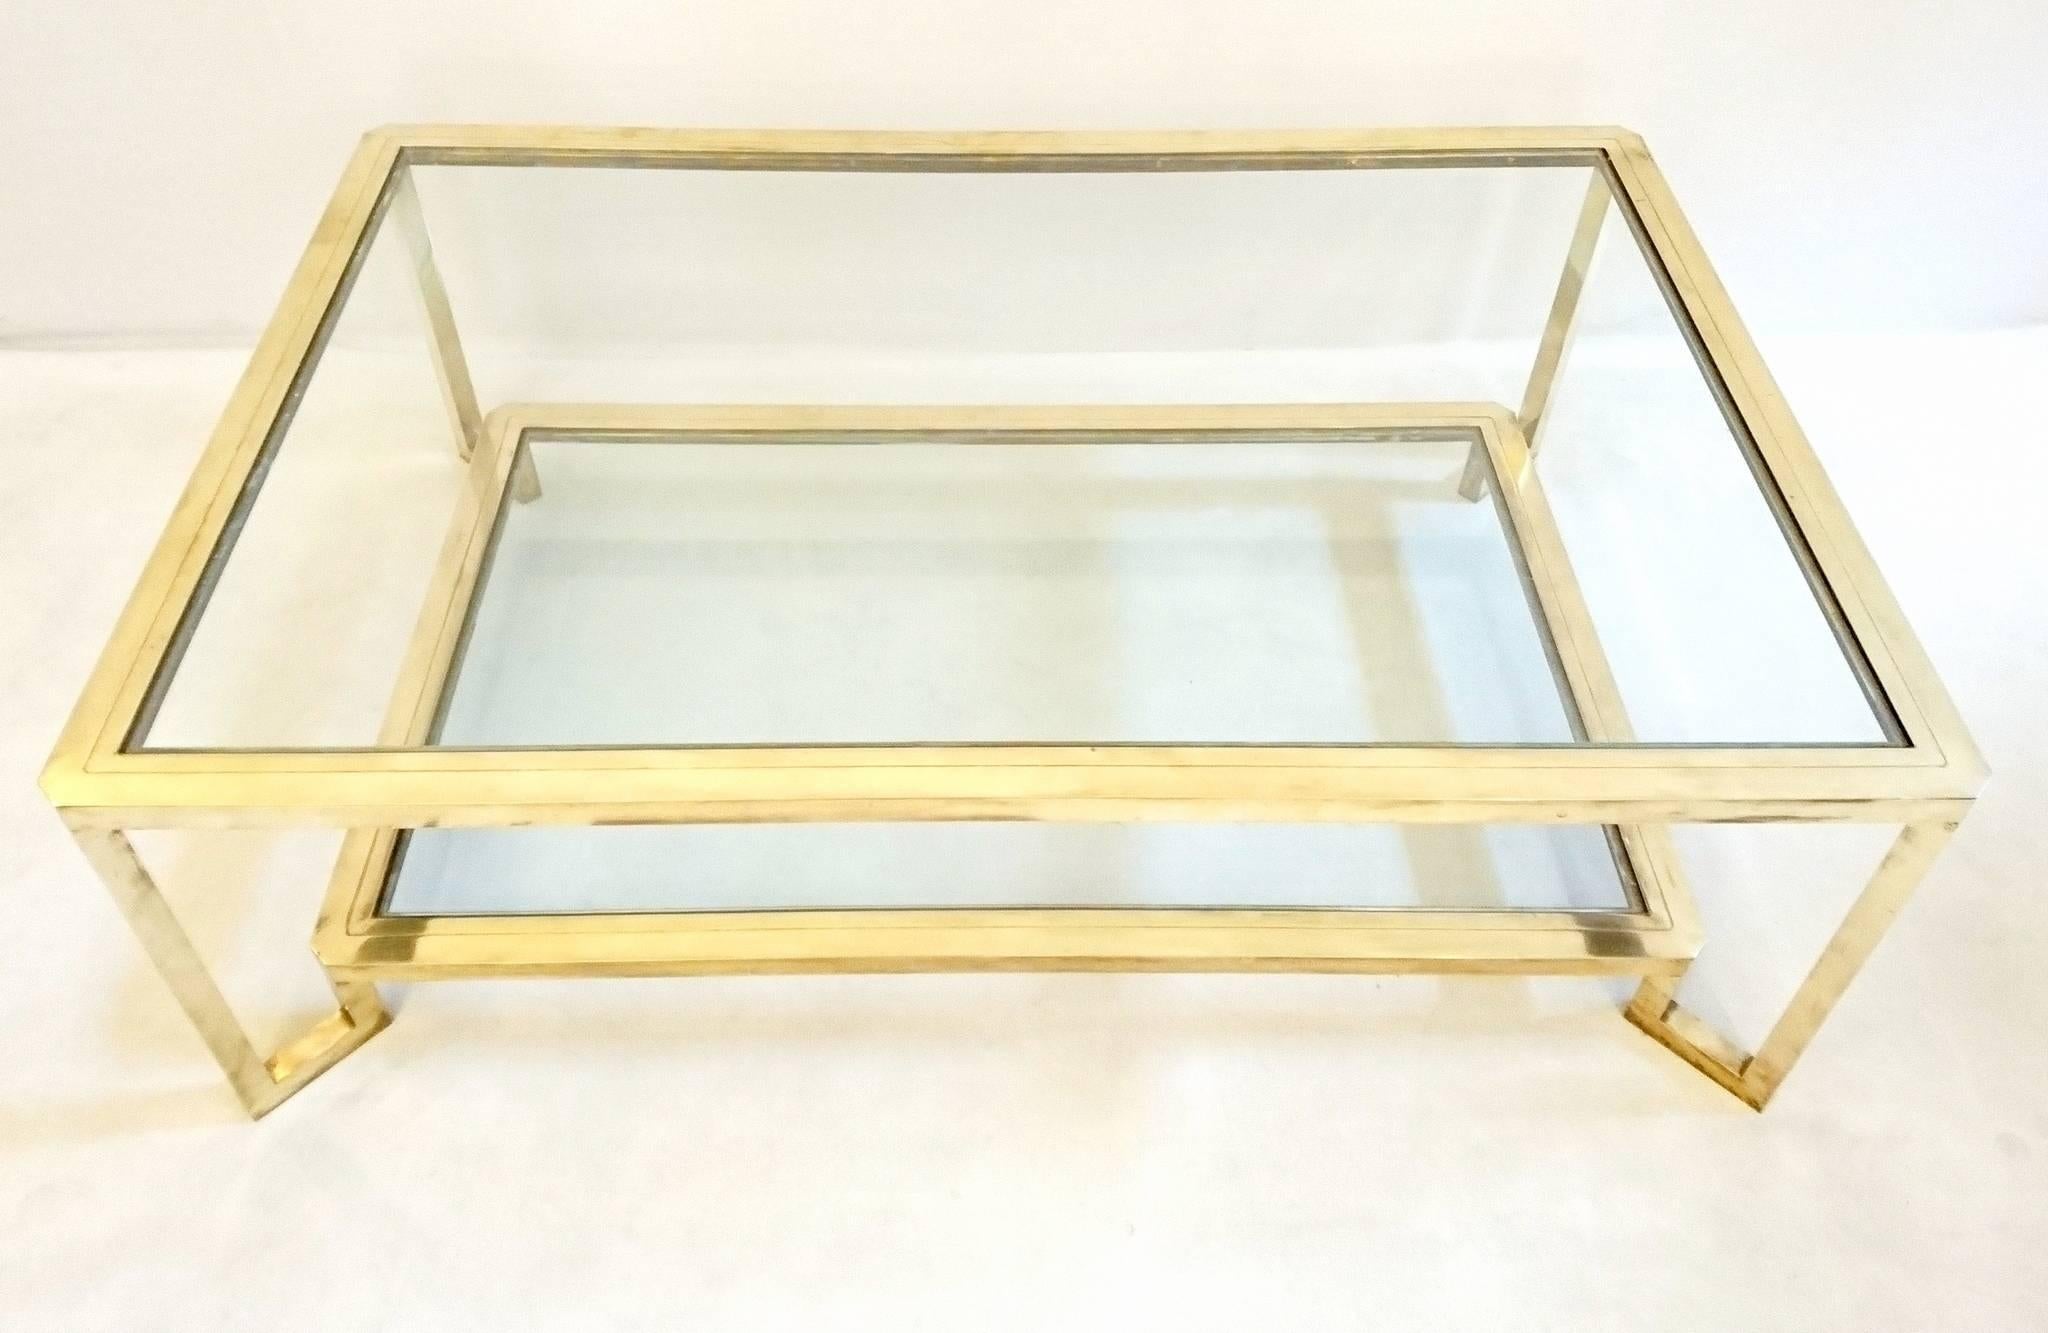 High quality table in brass in two levels with beveled corners.